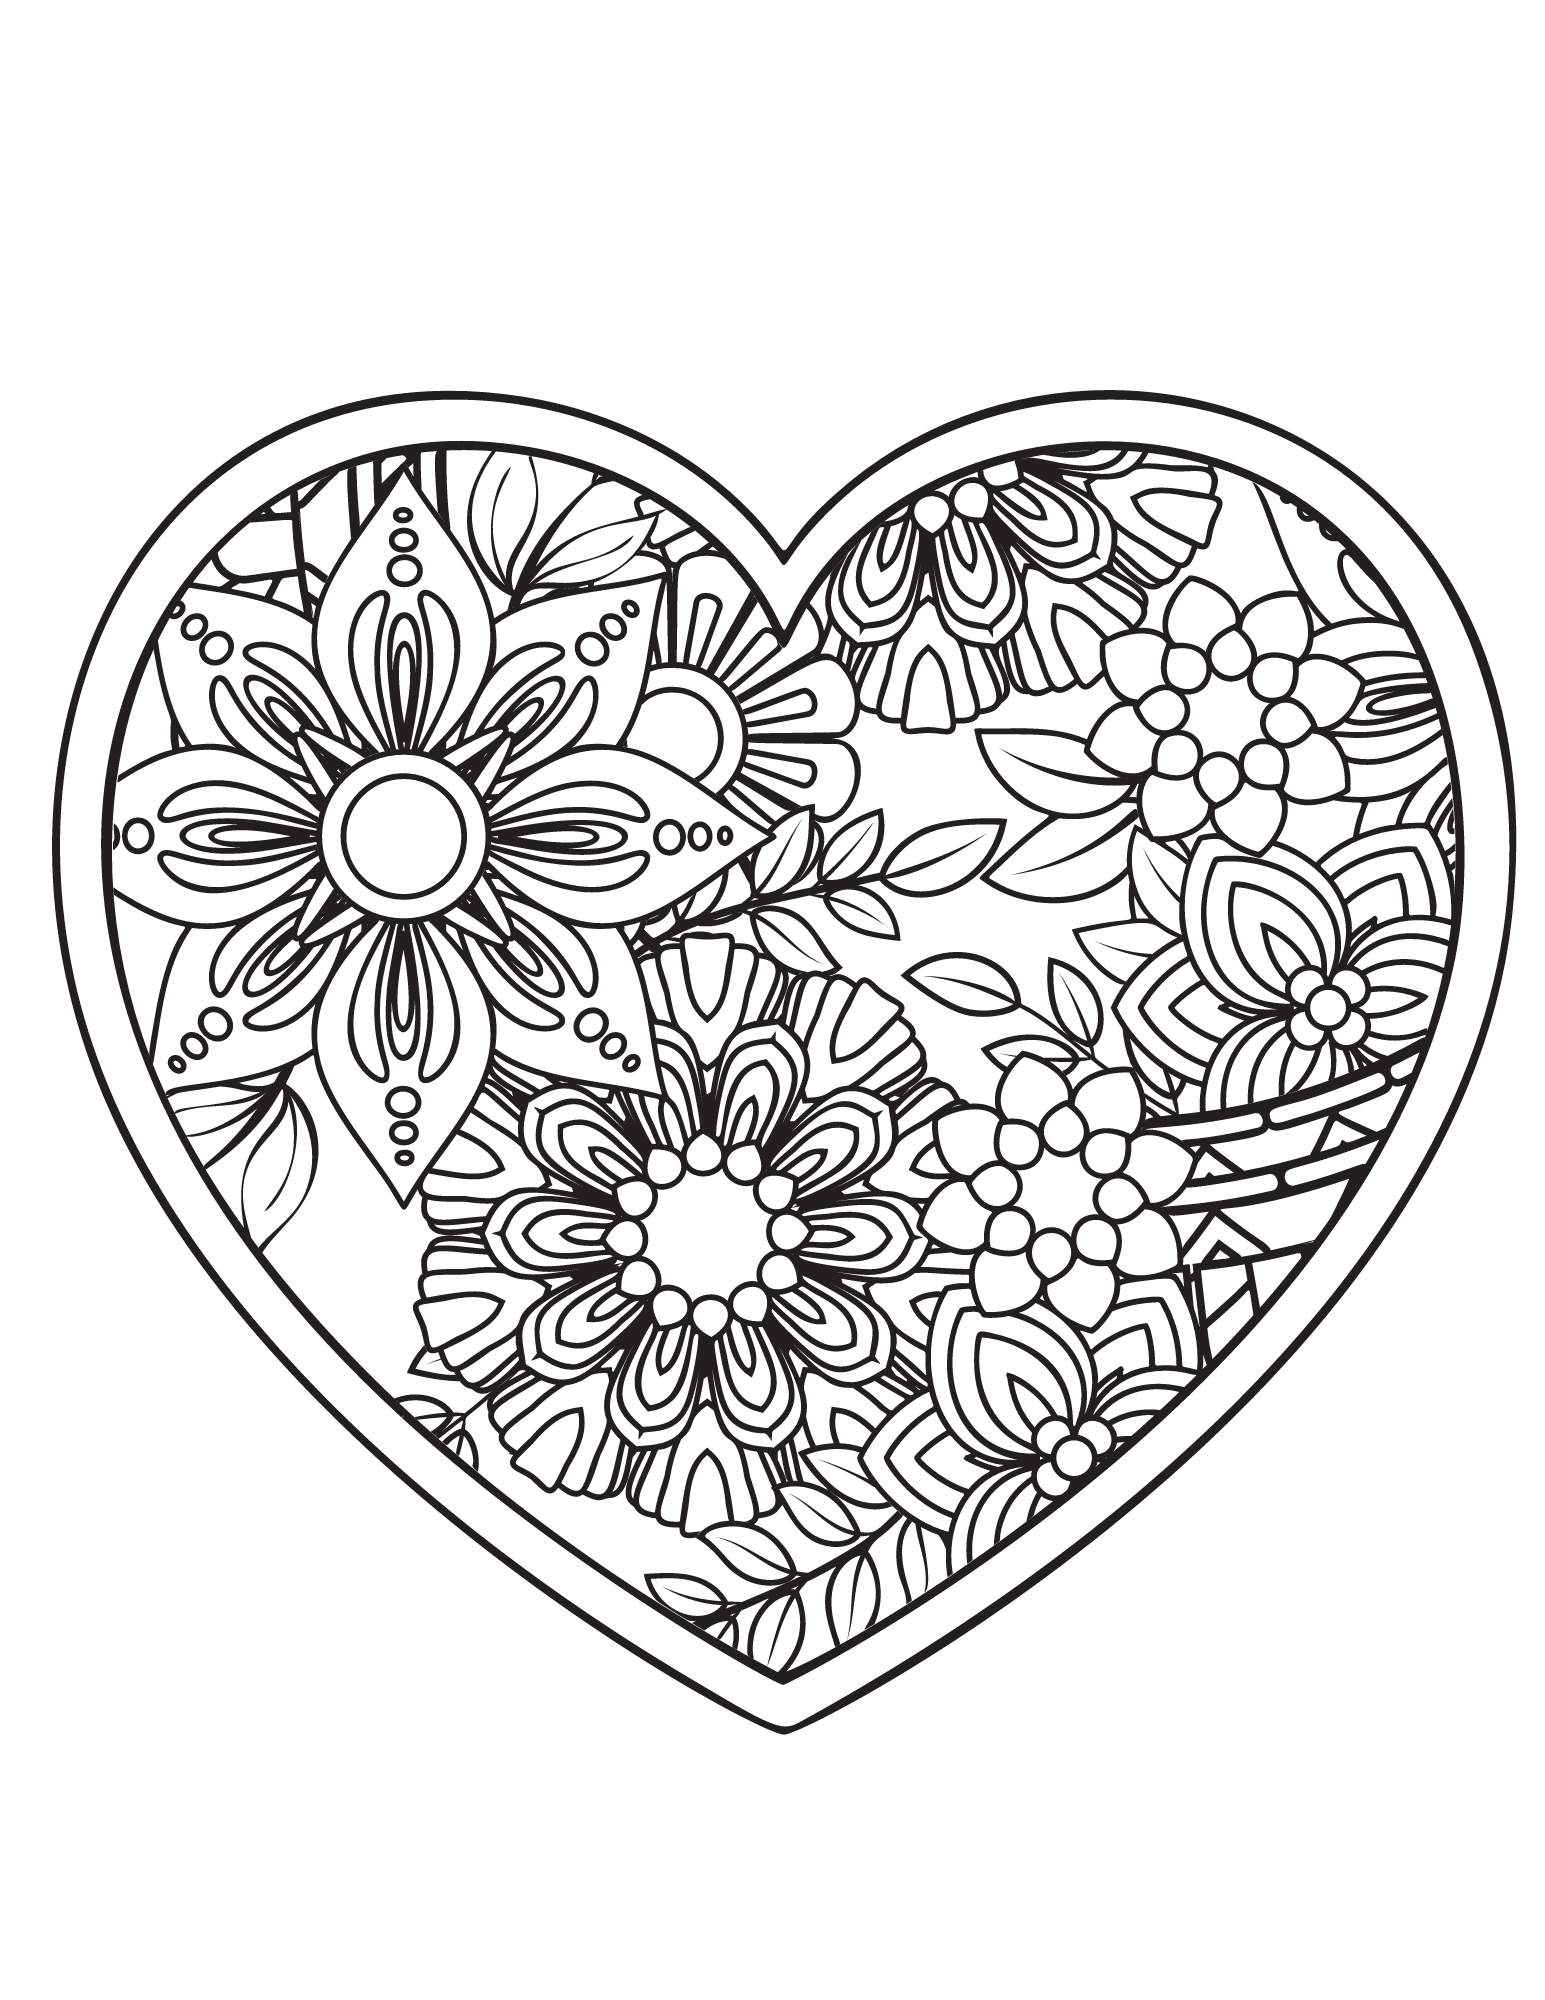 Free printable heart coloring pages for kids and adults